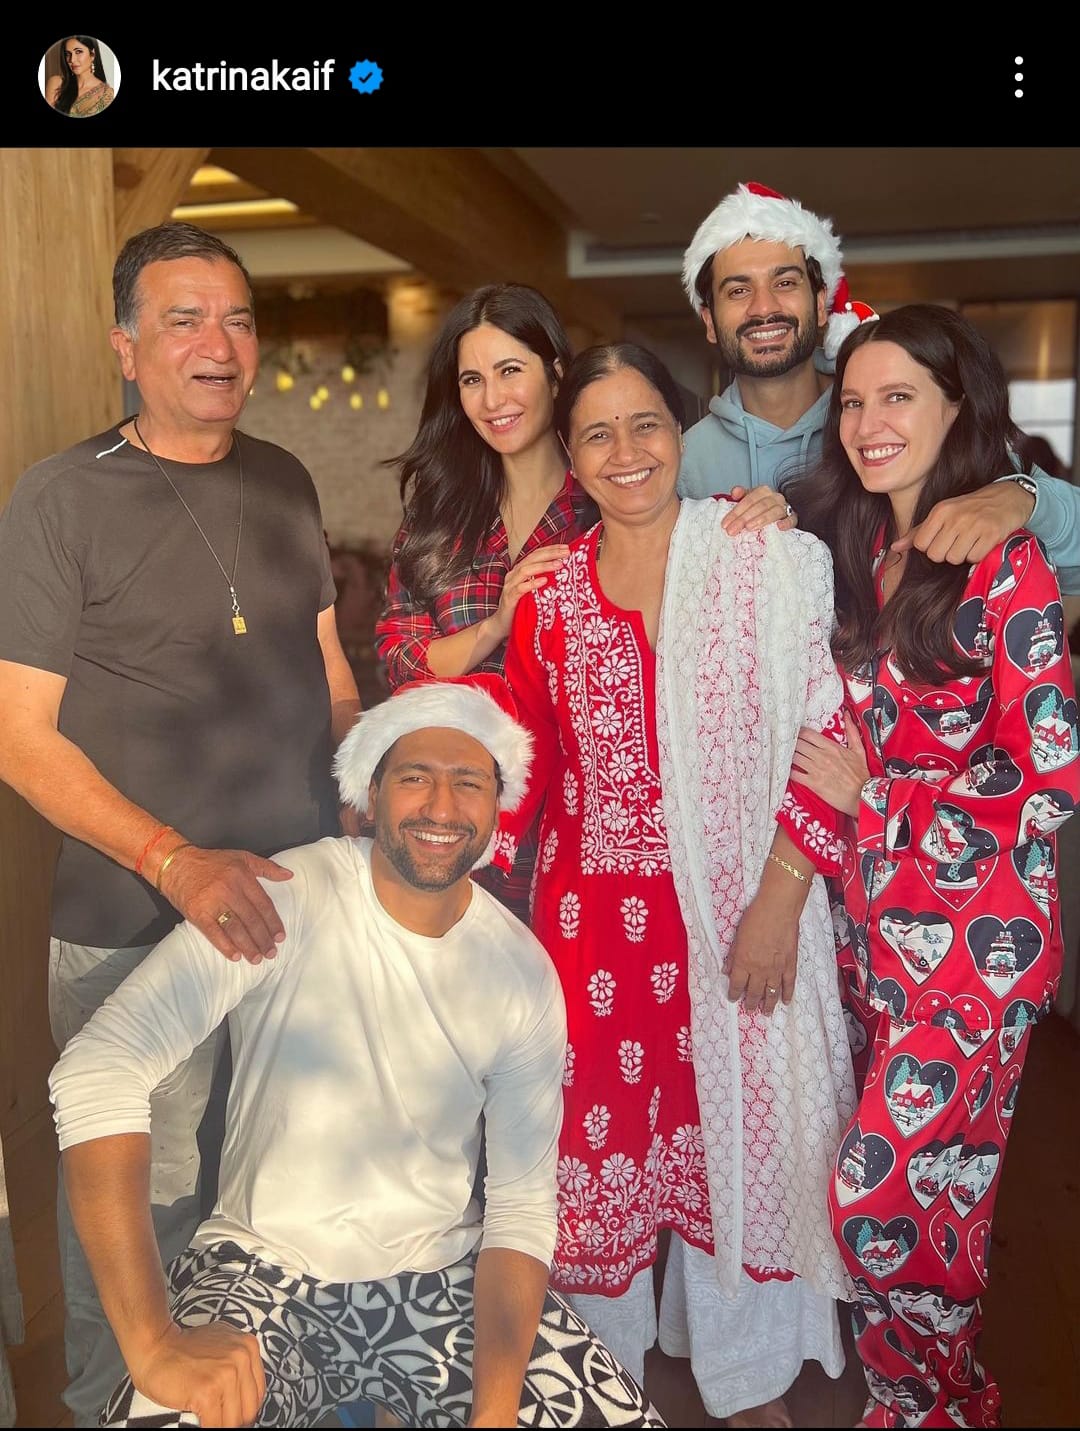 Katrina shared her Christmas pictures; fans assumed that she is Pregnent